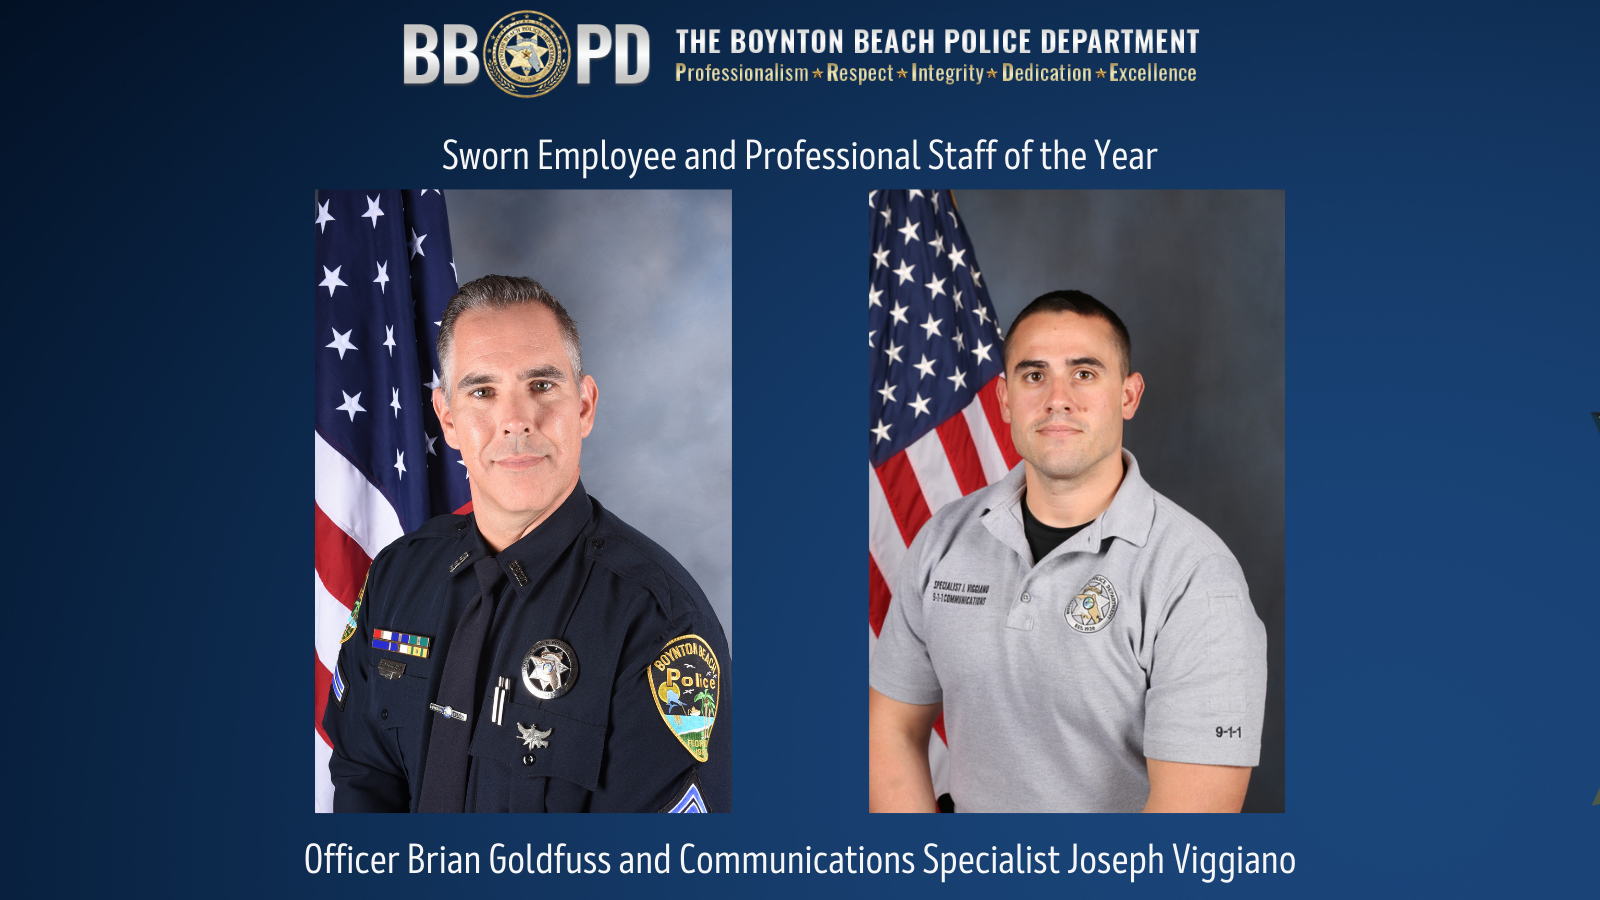 Announcement of sworn employee and professional staff of year